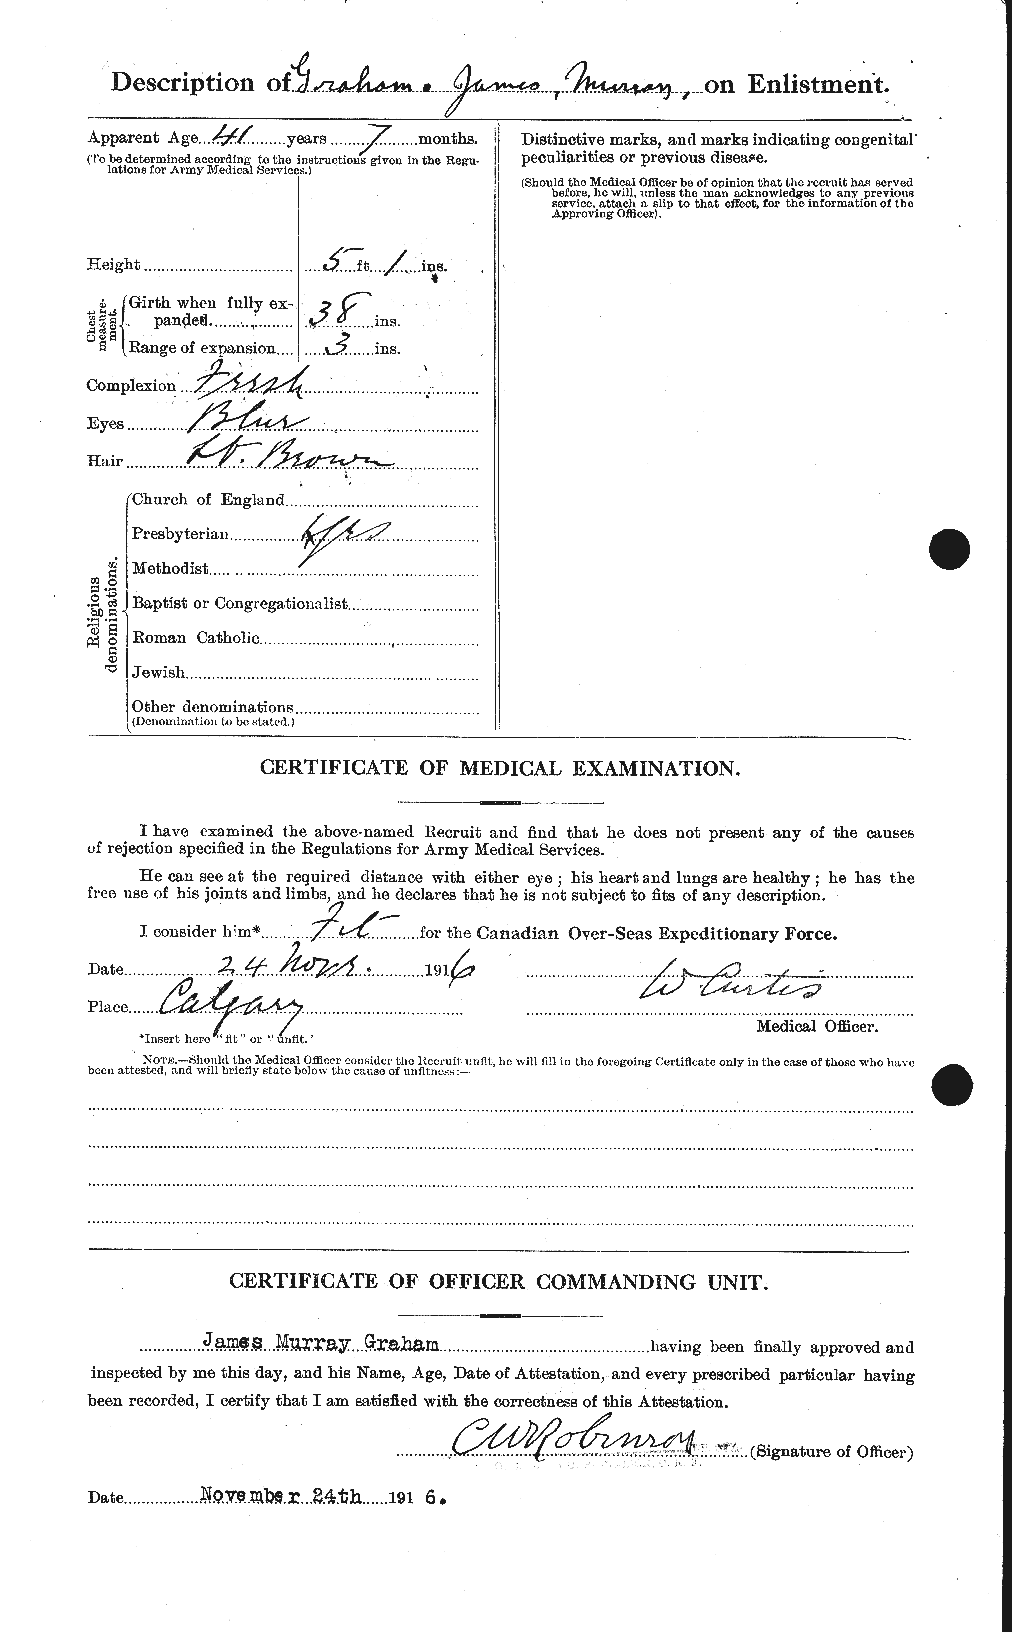 Personnel Records of the First World War - CEF 357831b